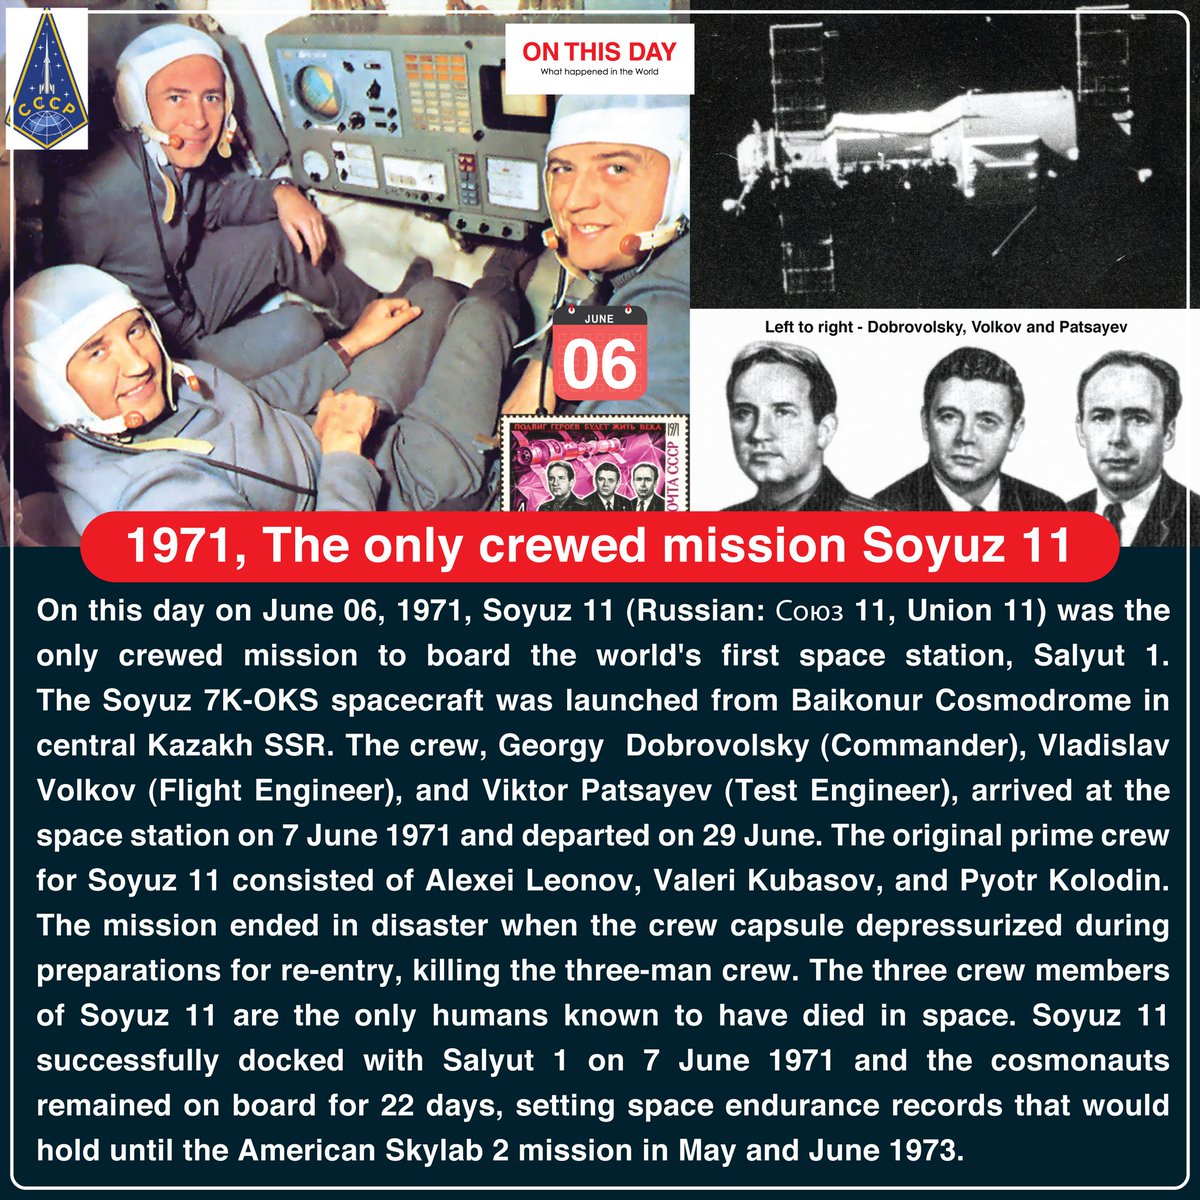 #OnThisDay 1971, The only crewed mission Soyuz 11

#June #June06 #historytoday #in2071 #52yearsago #onthisdayinhistory #doyouknow #onlycrewedmission #soyuz11 #space #salyut #salyut1 #spacestation #soyuz11onlycrewedmission #worldsfirstspacestation #SSR #Georgy #soyuz11disaster